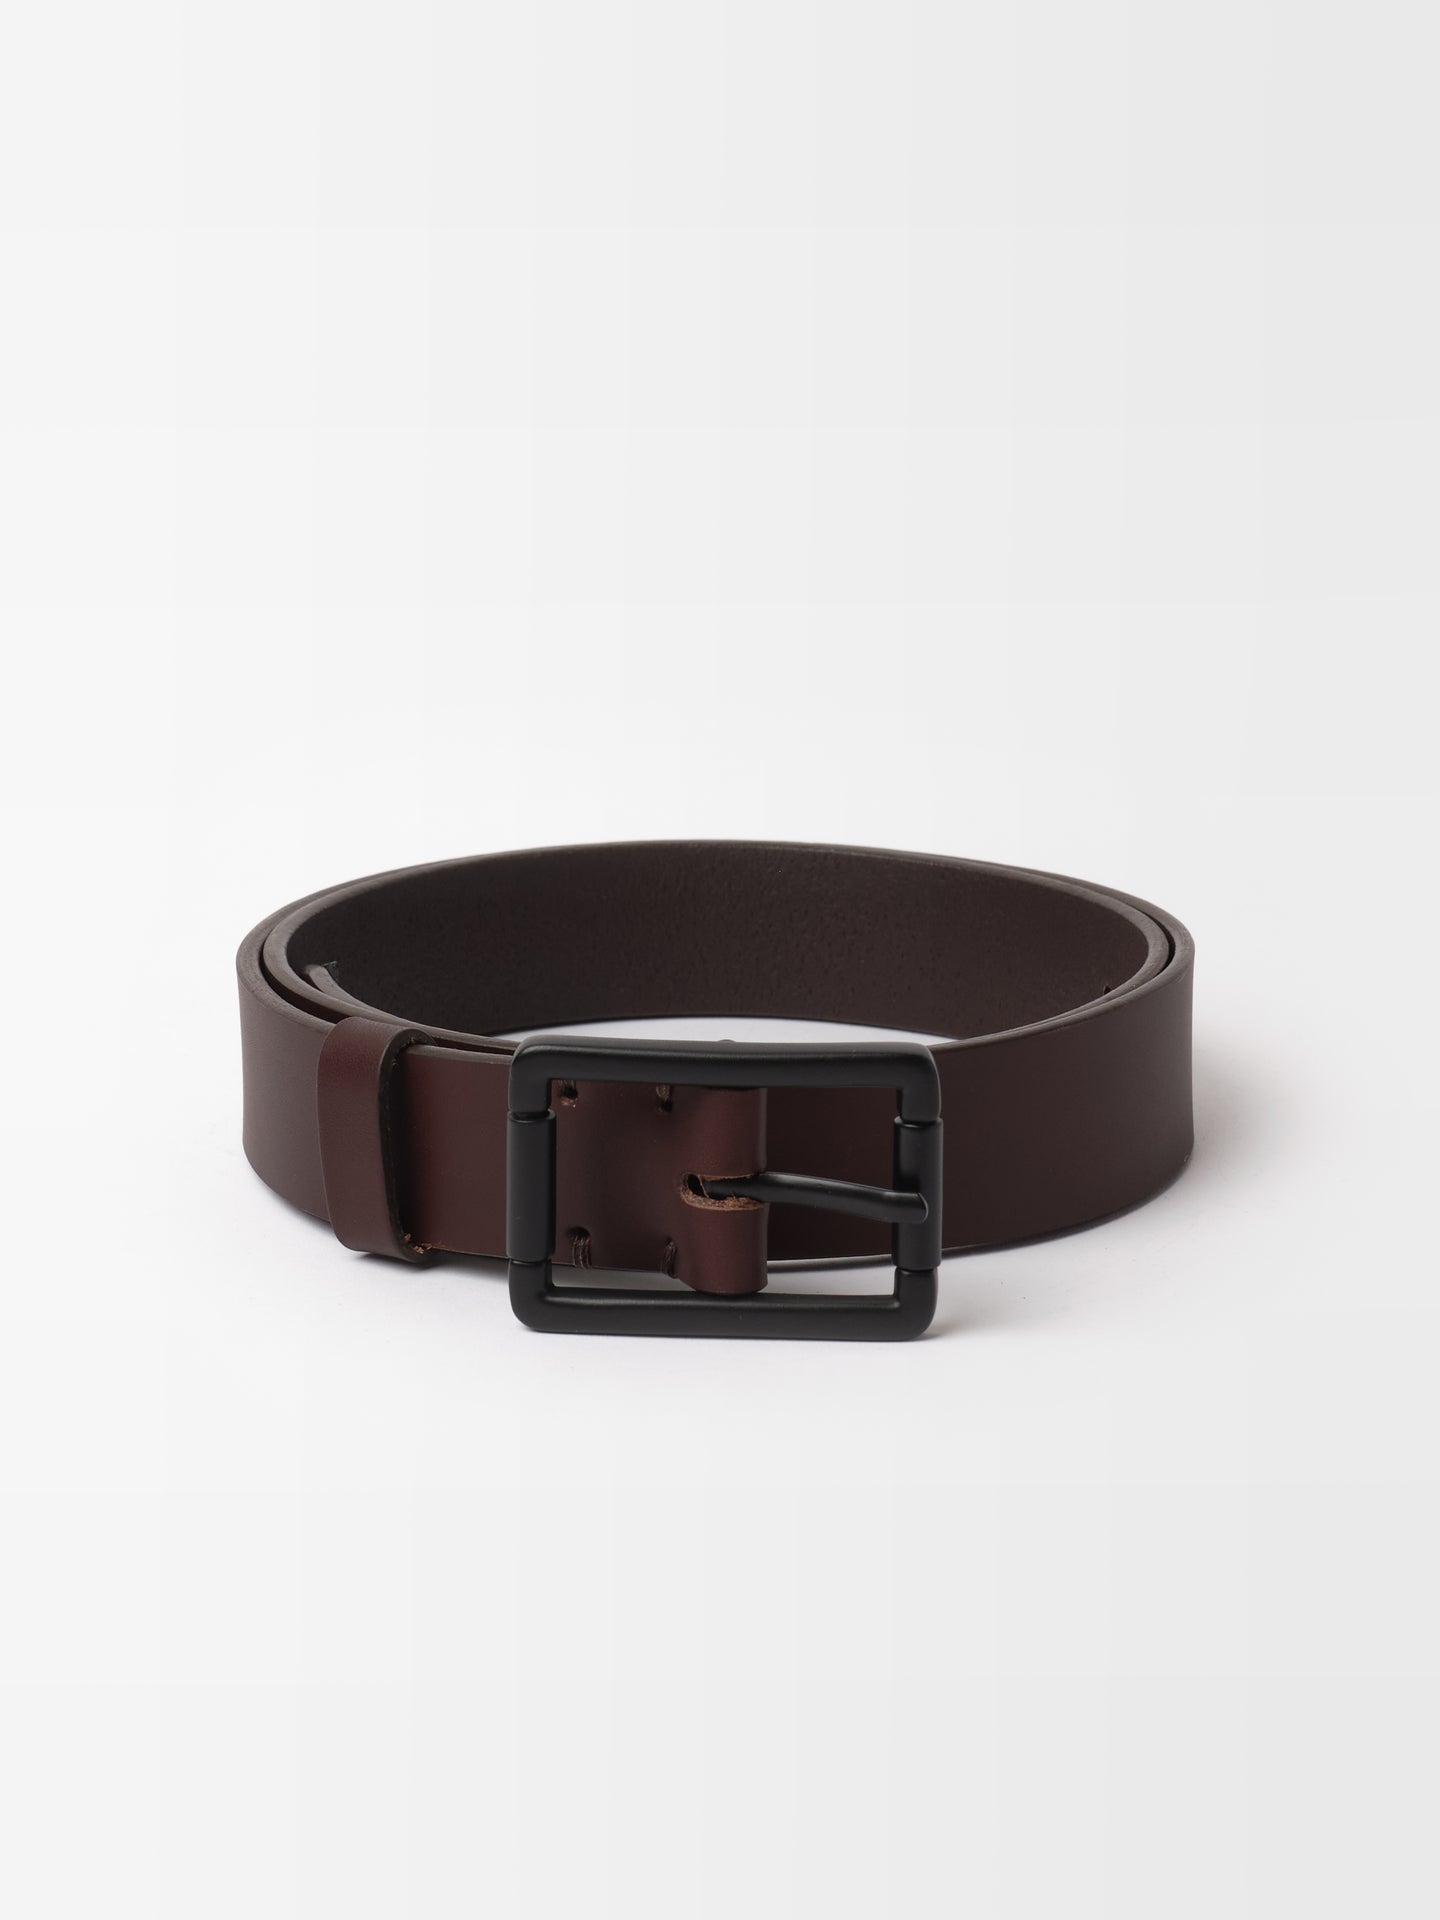 Leather Belt in Chestnut